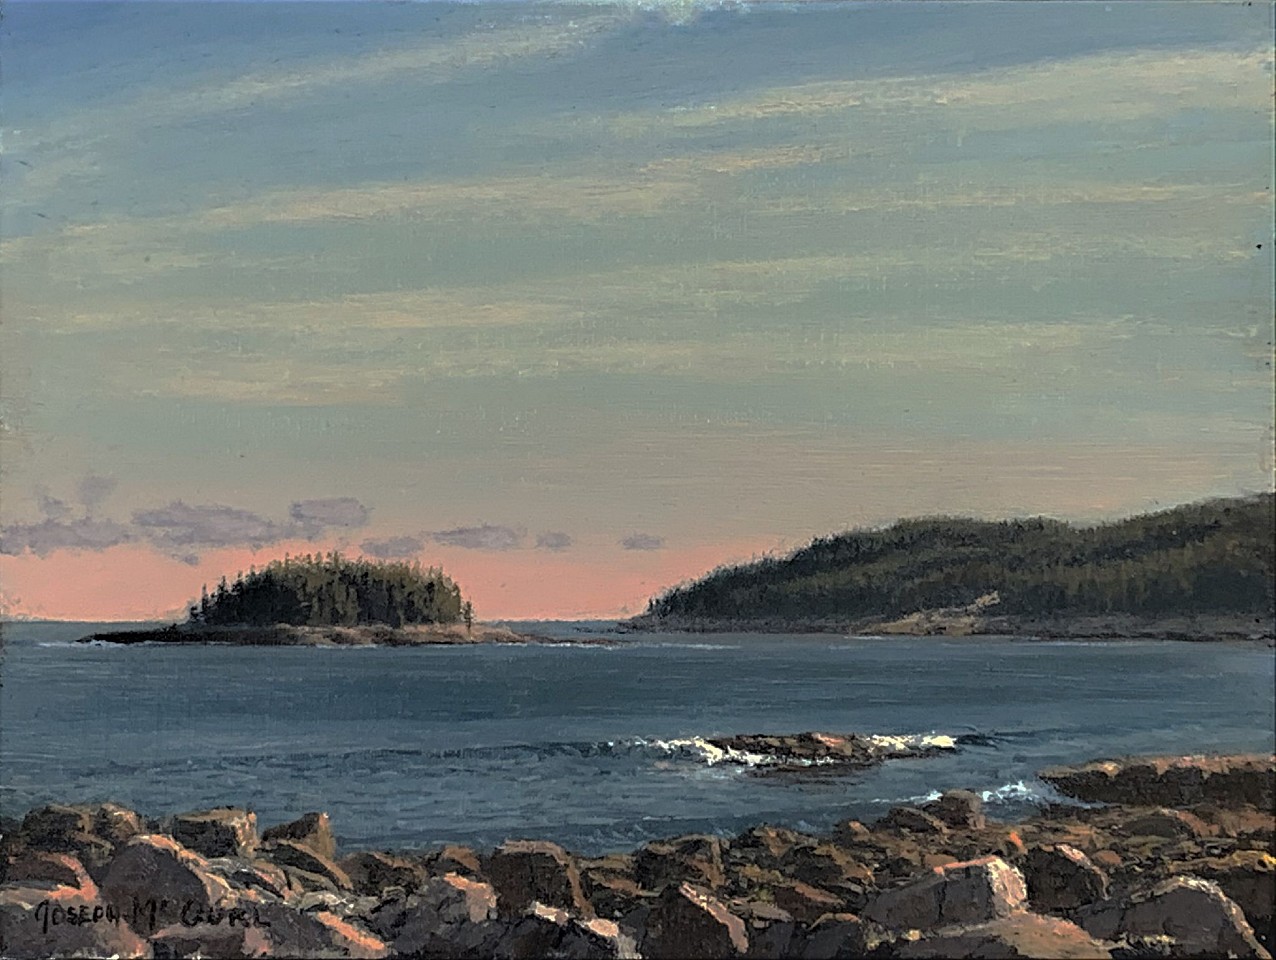 Joseph McGurl, Field Painting: Day is Done, the Coast of Maine, 2018
oil on linen panel, 9 x 12 in. (22.9 x 30.5 cm)
JM200422